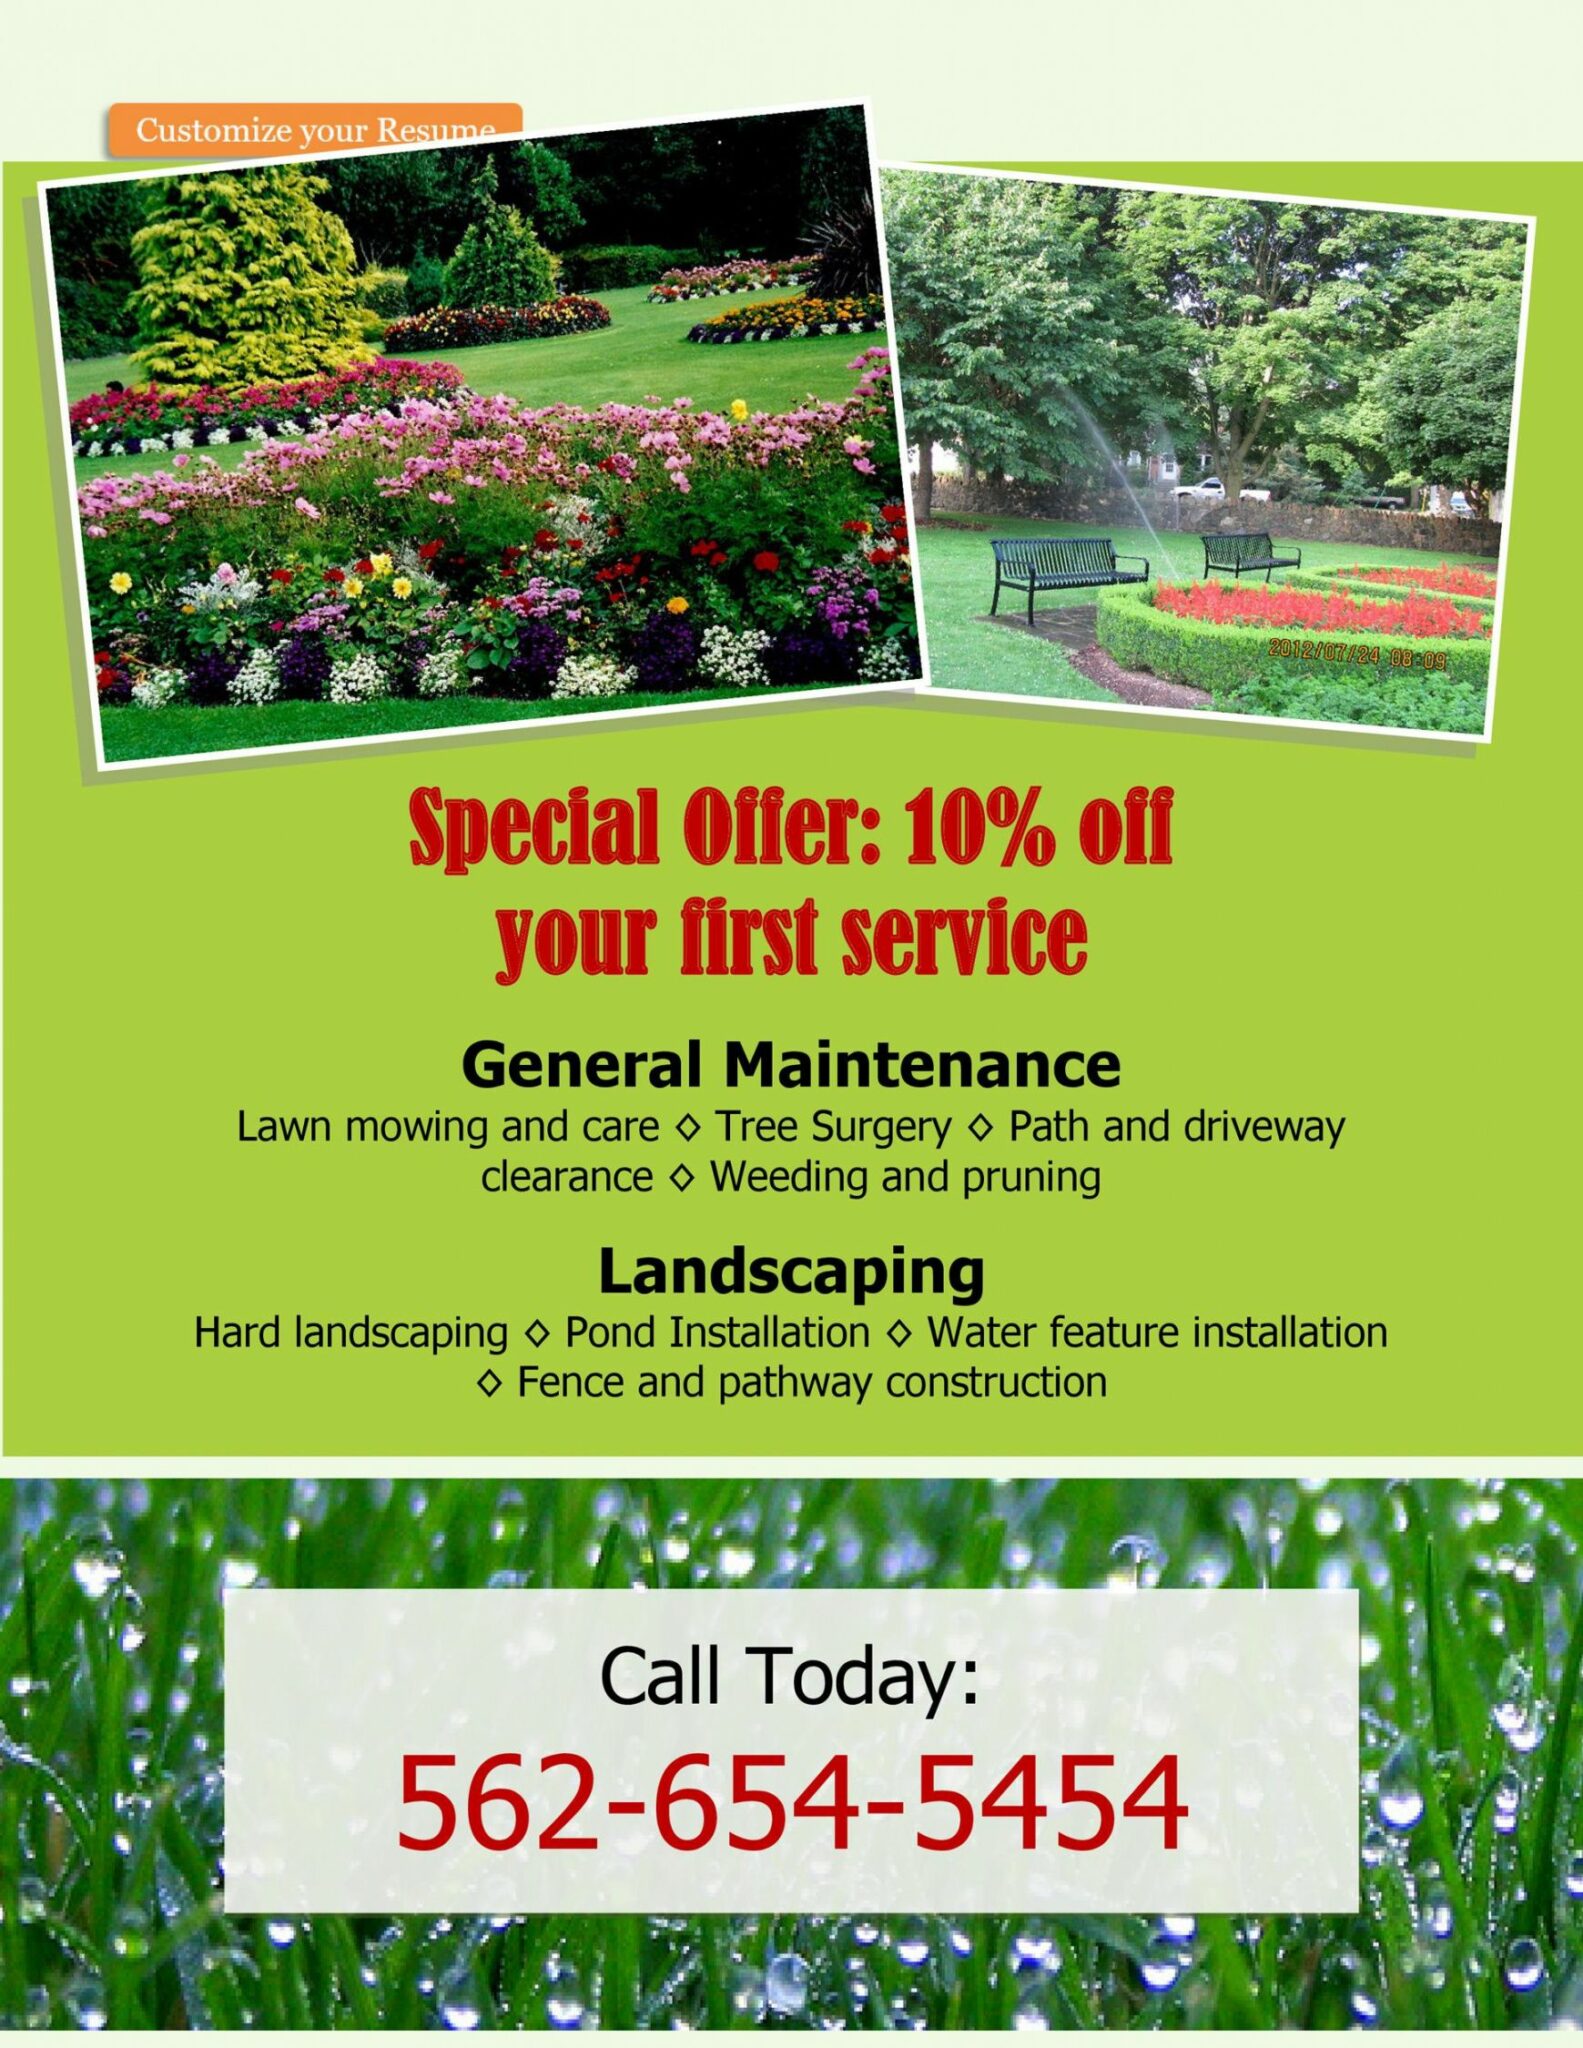 sample-30-free-lawn-care-flyer-templates-lawn-mower-flyers-lawn-care-business-budget